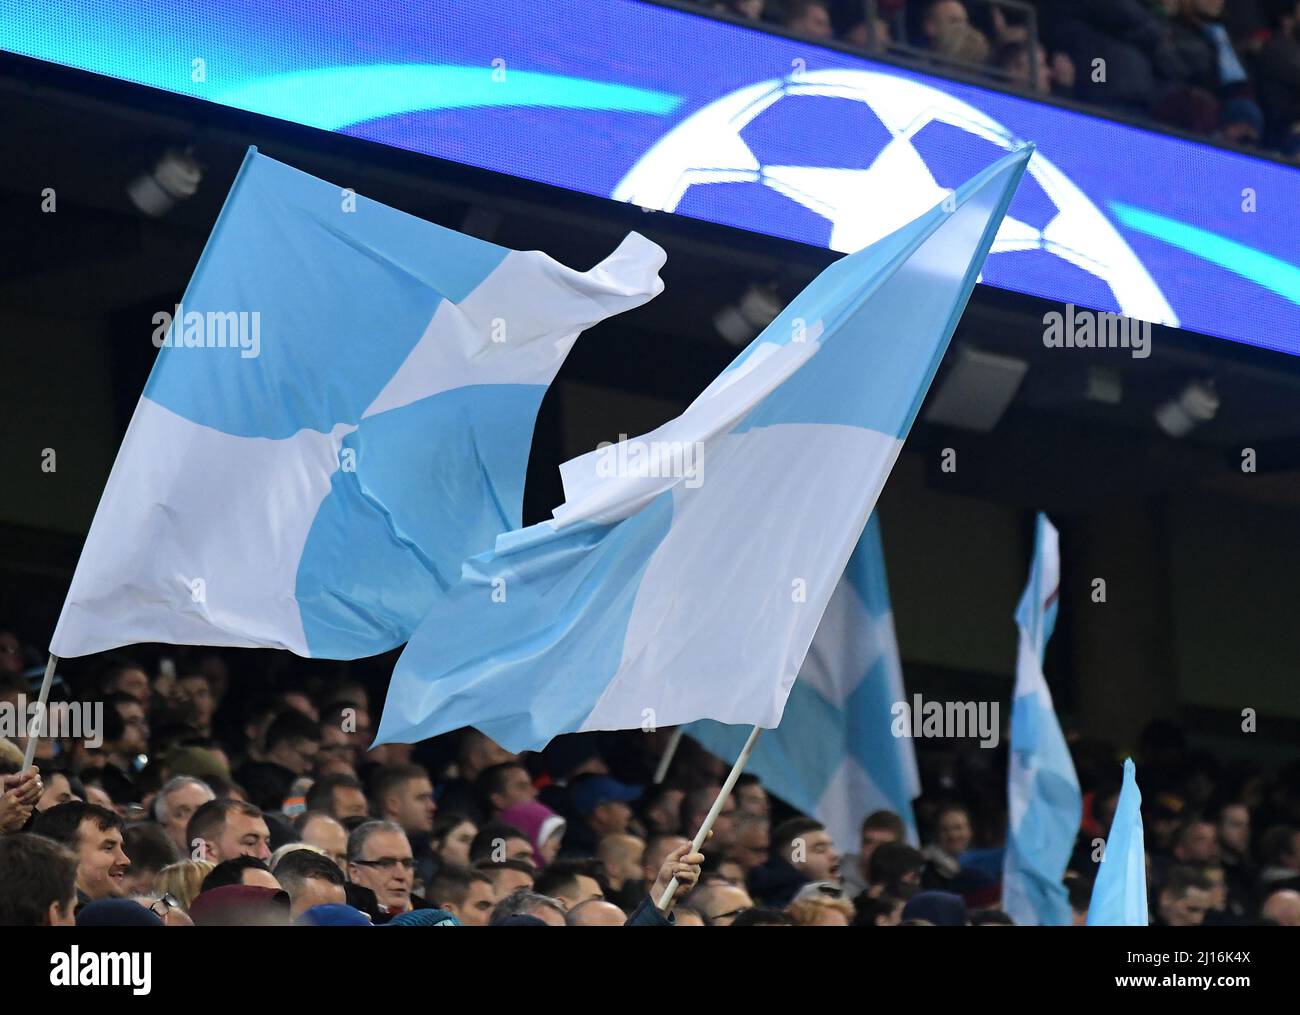 MANCHESTER, ENGLAND - NOVEMBER 1, 2016: Manchester City colored flags pictured during the UEFA Champions League Group C game between Manchester City and FC Barcelona at City of Manchester Stadium. Copyright: Cosmin Iftode/Picstaff Stock Photo